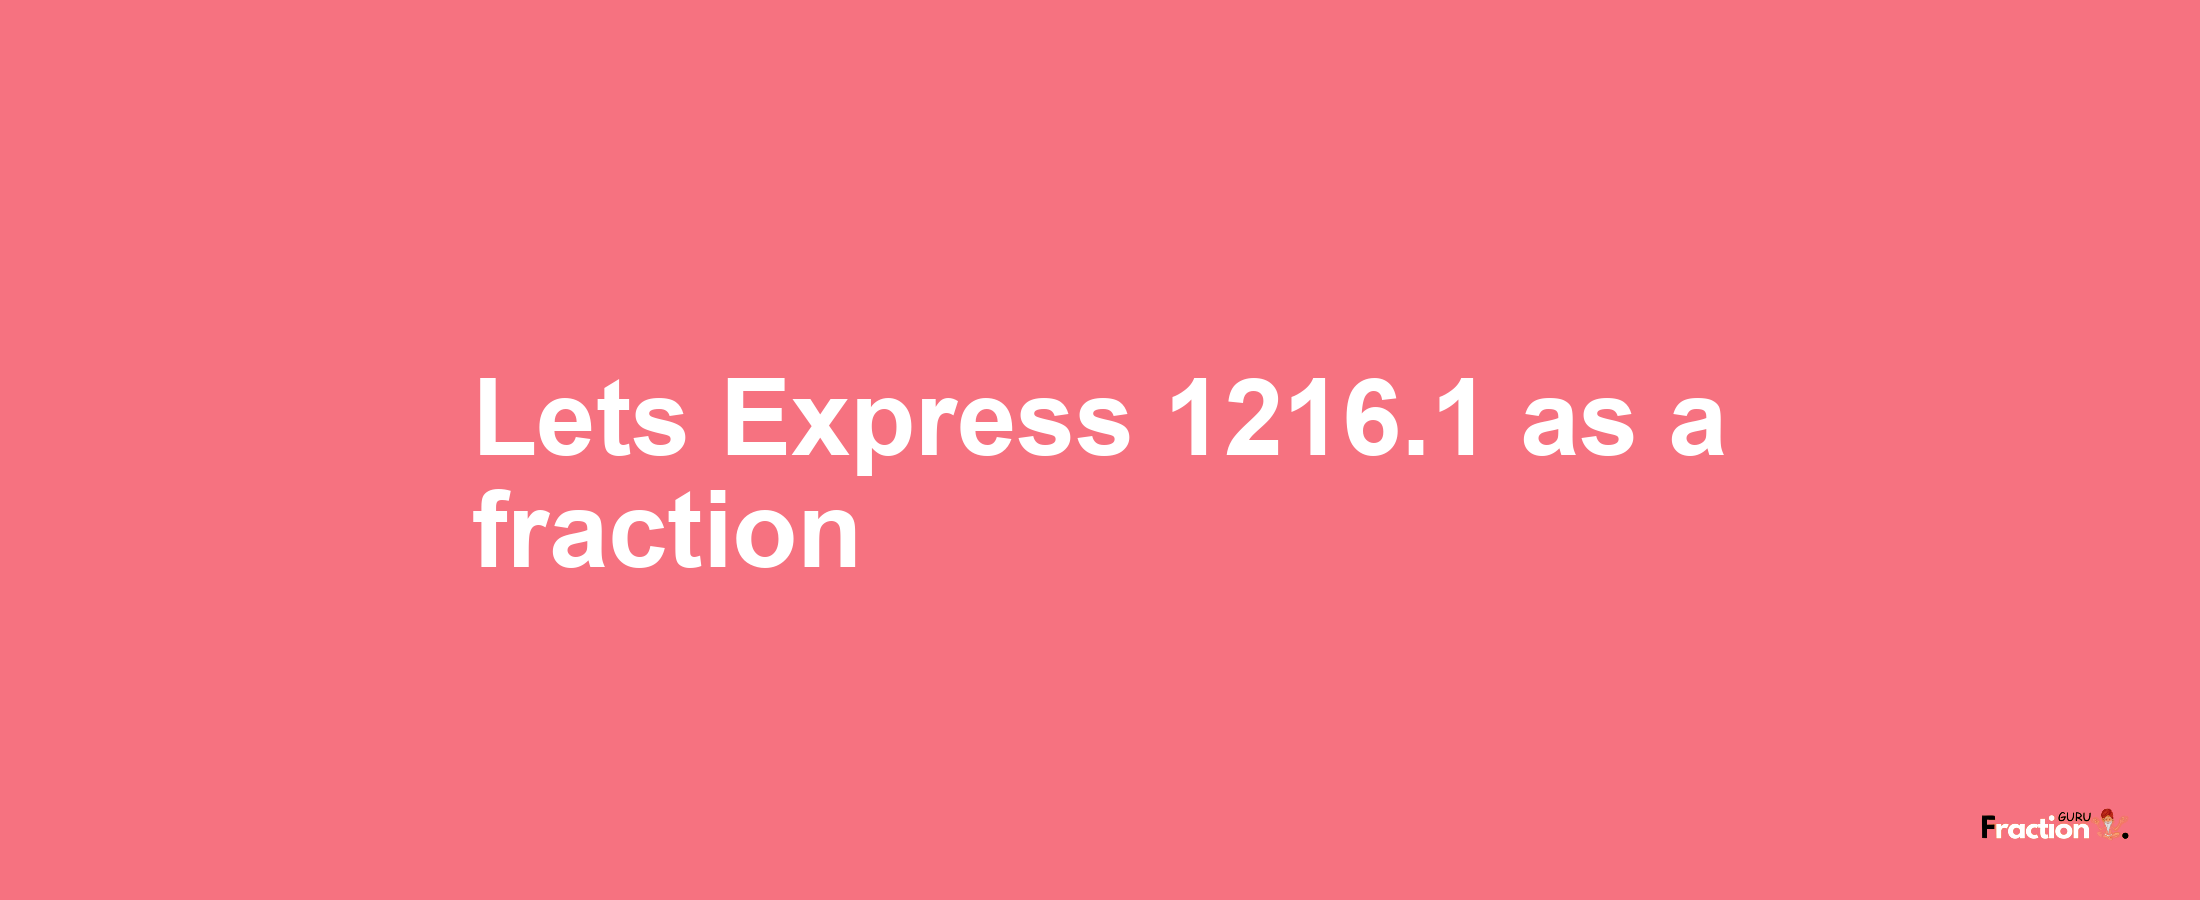 Lets Express 1216.1 as afraction